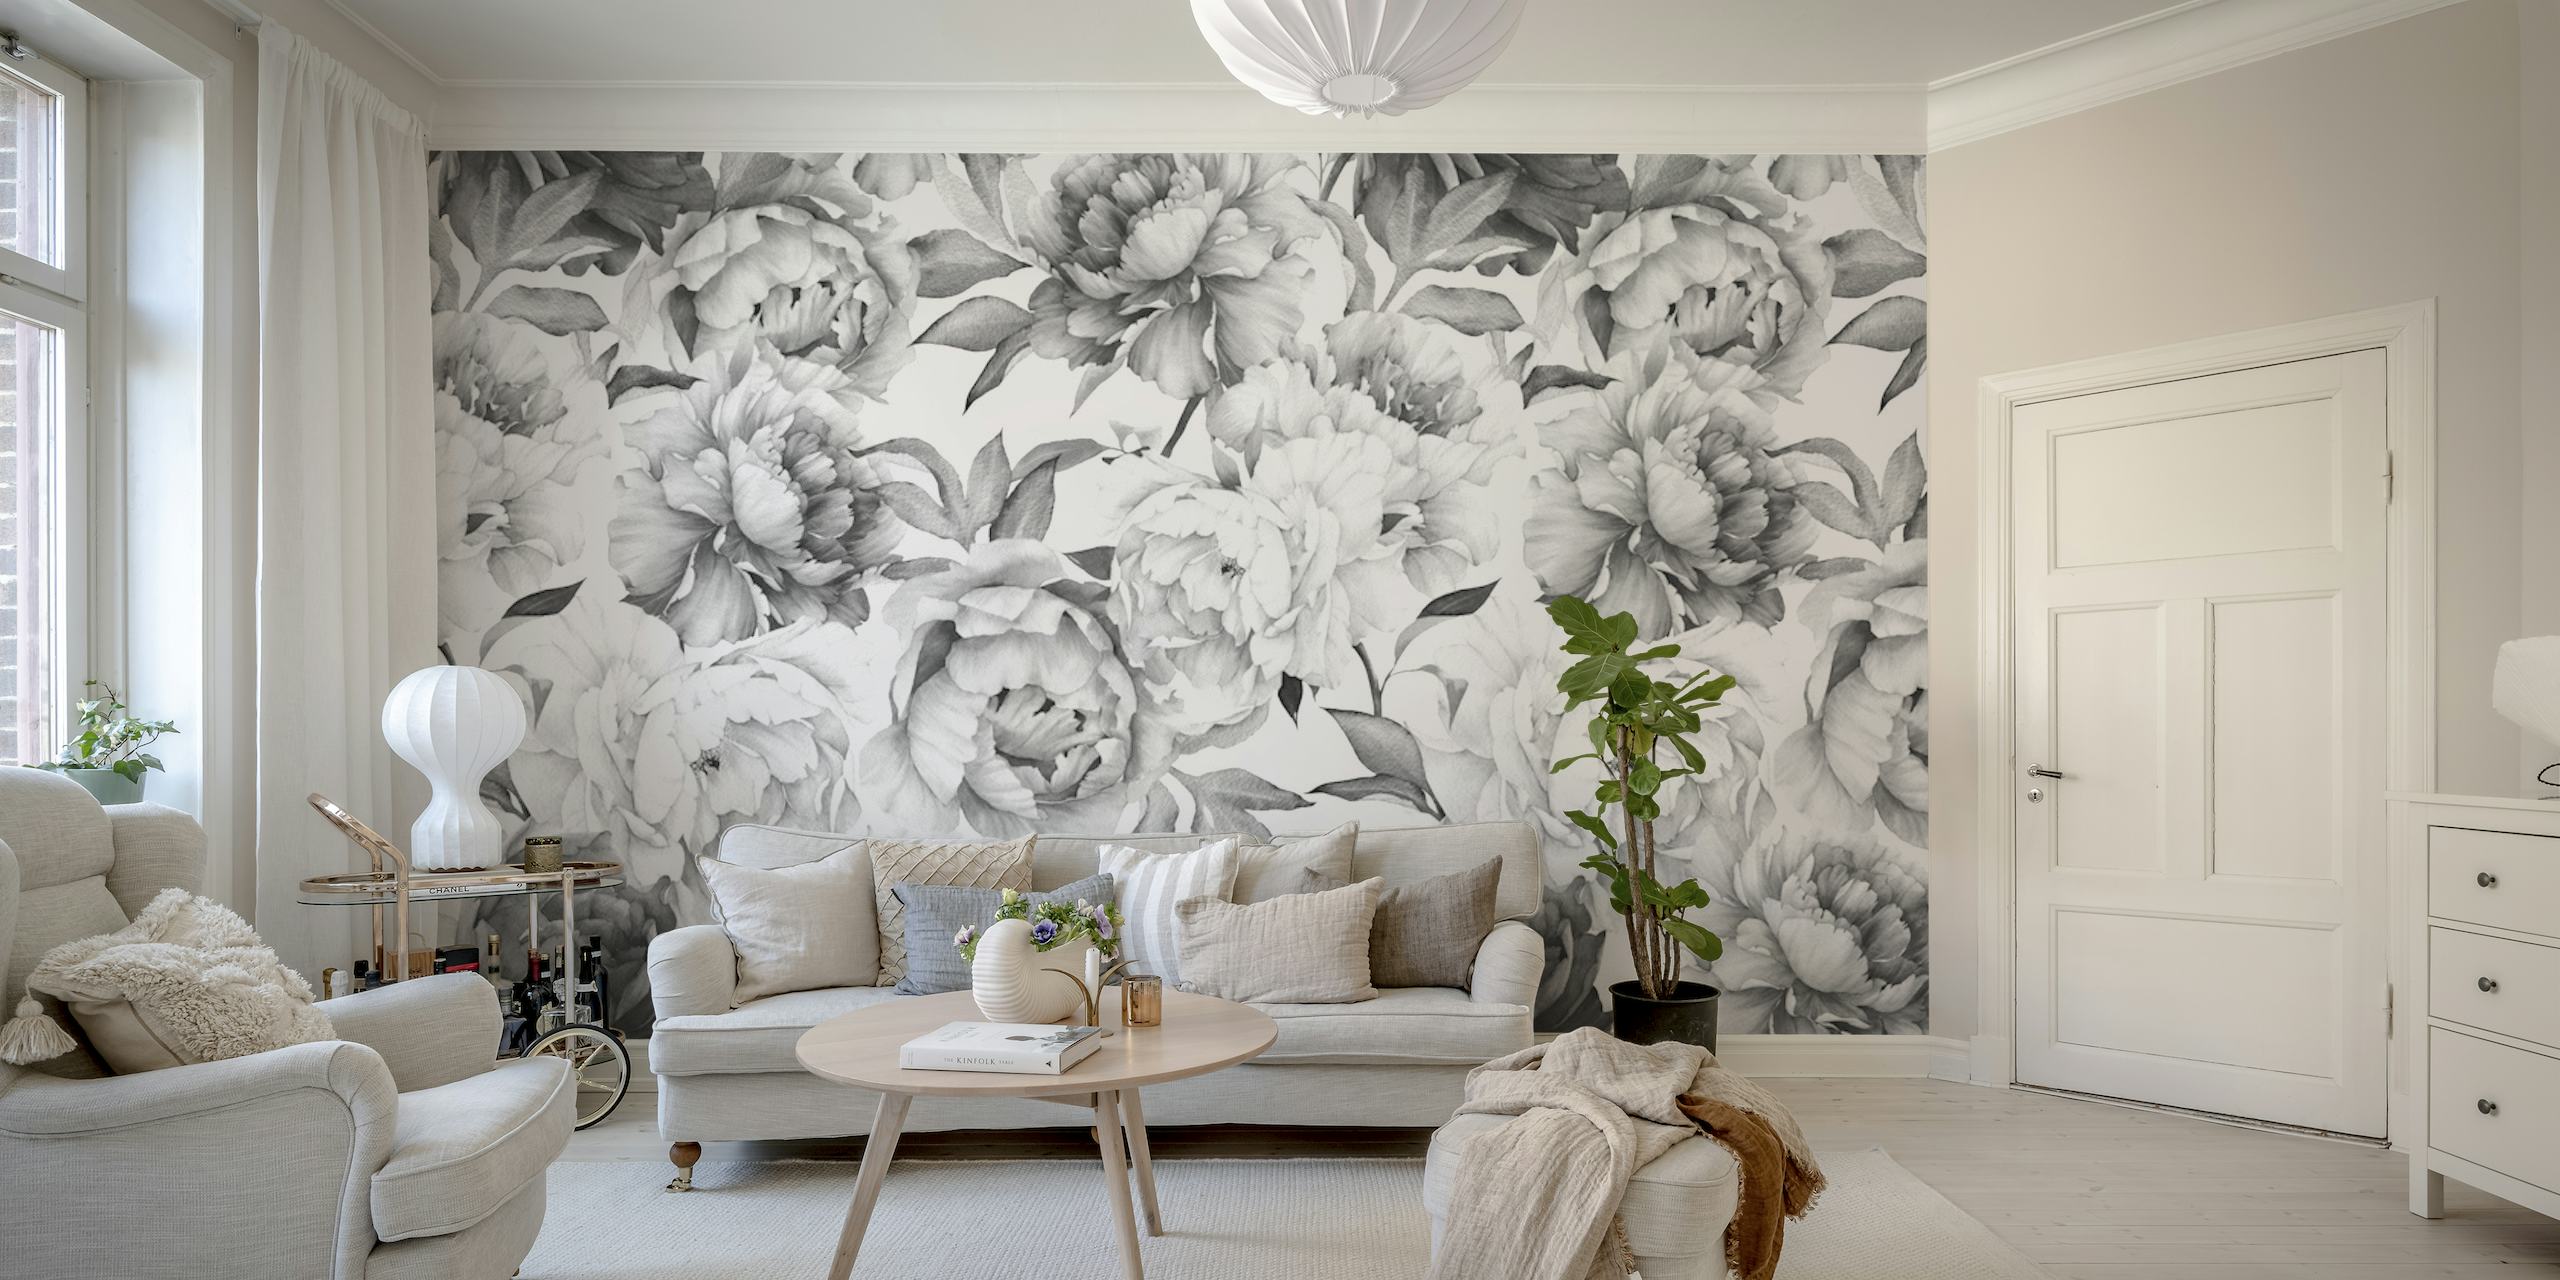 Black and white vintage floral wall mural design.